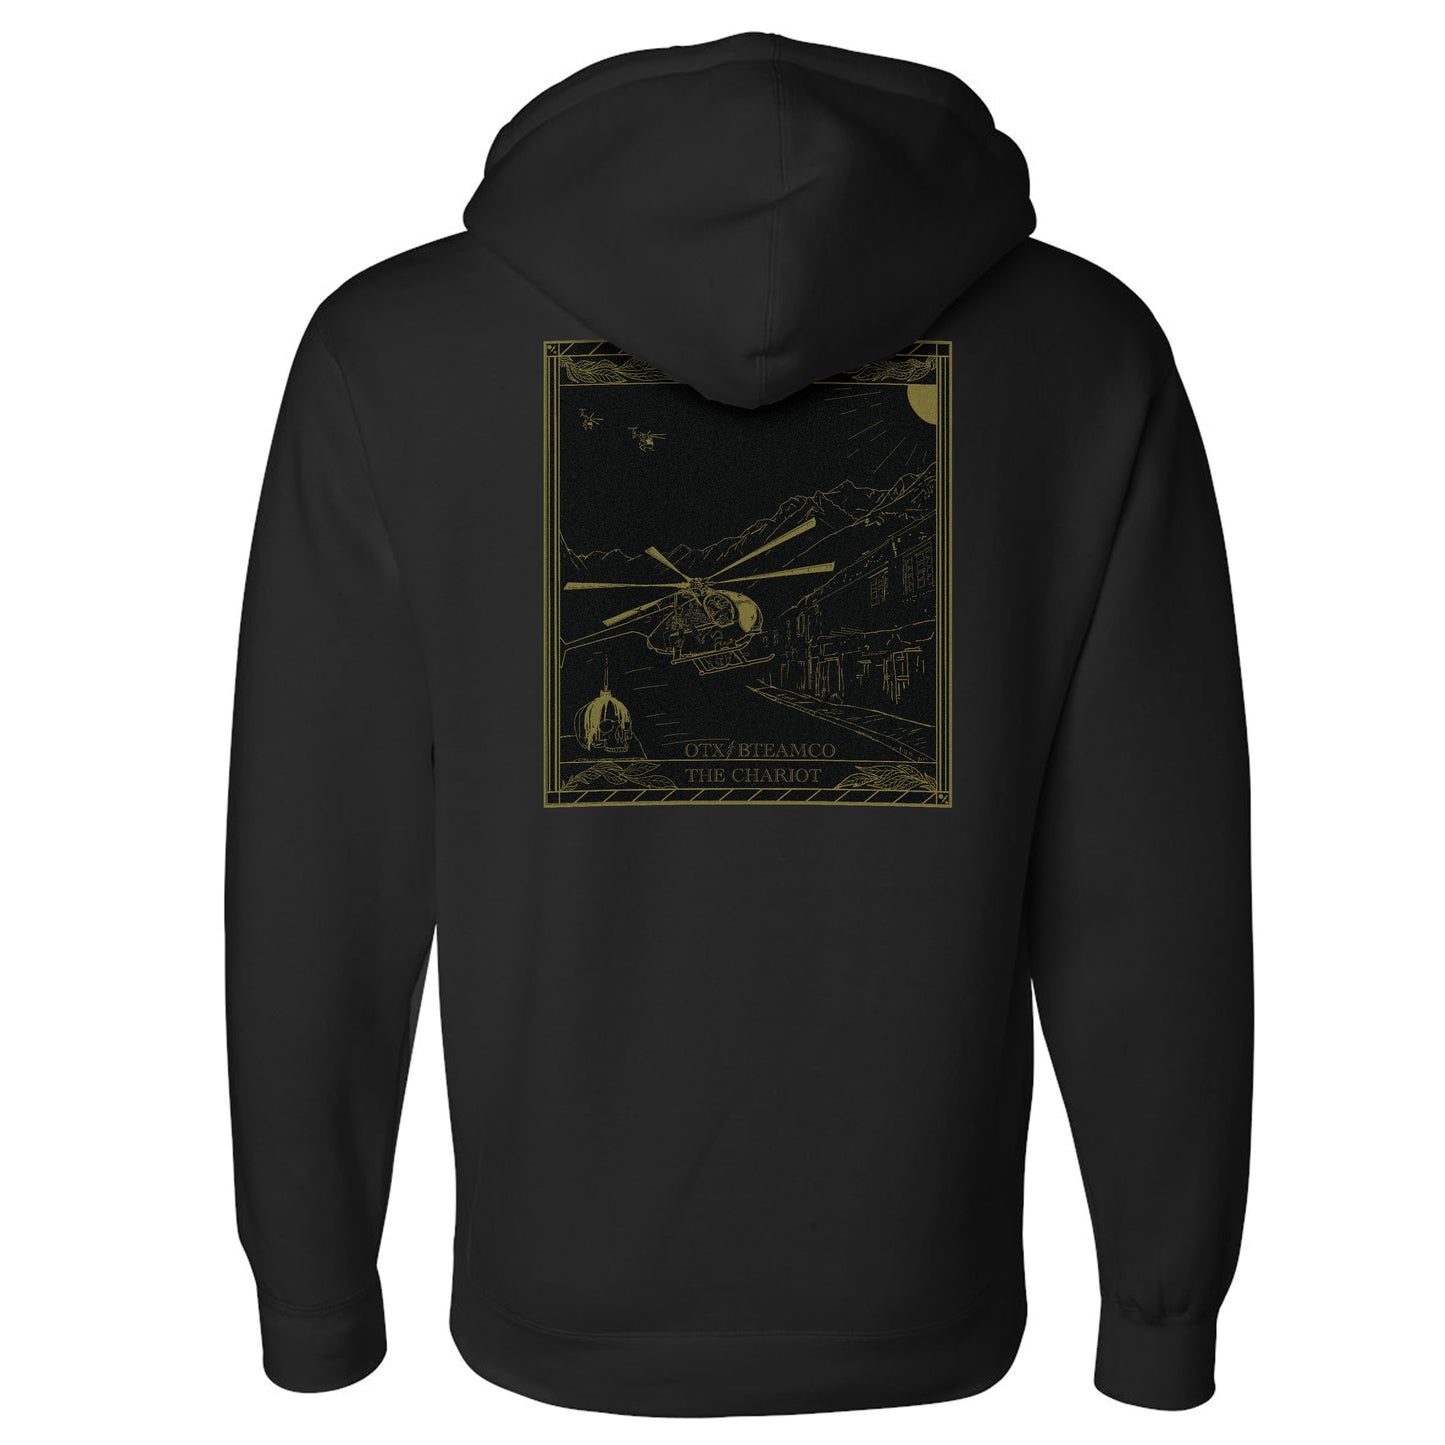 OTXxBTEAMCO - The Chariot Hoodie